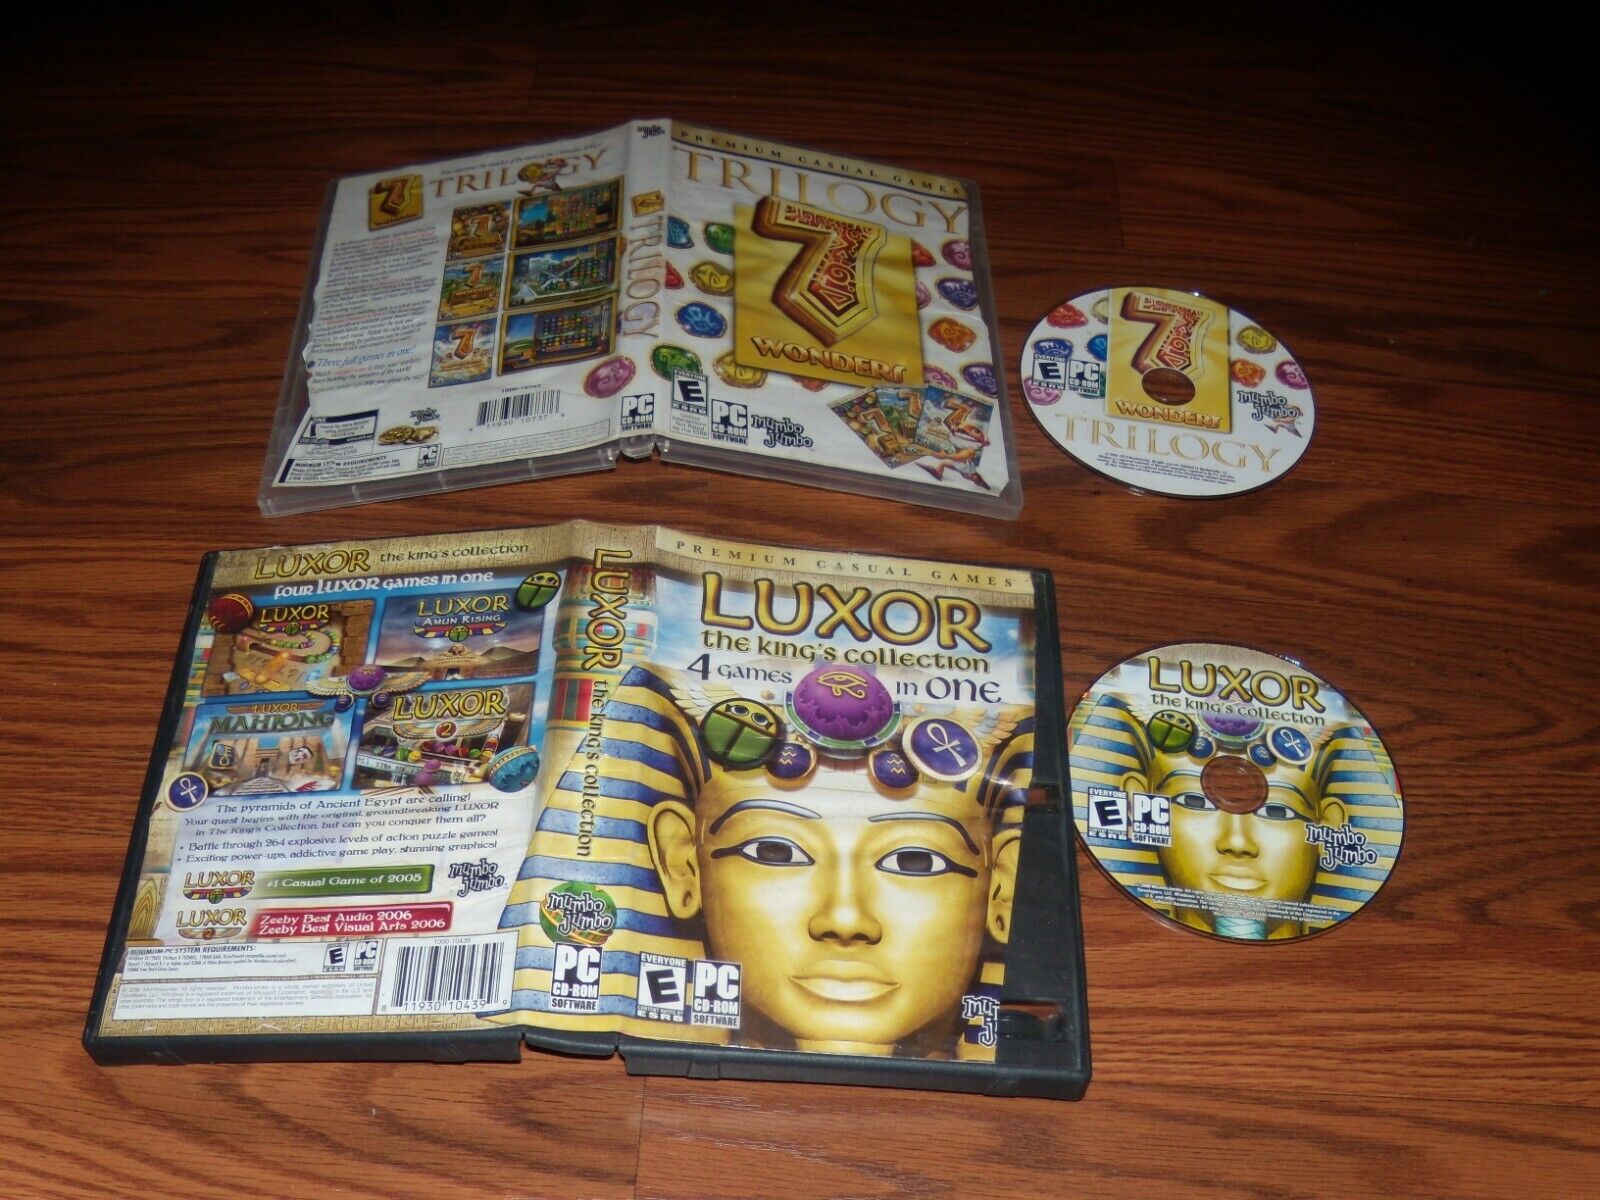 2 PC Games: Trilogy 7 Wonders and Luxor The Kings' Collection 4 Games in One